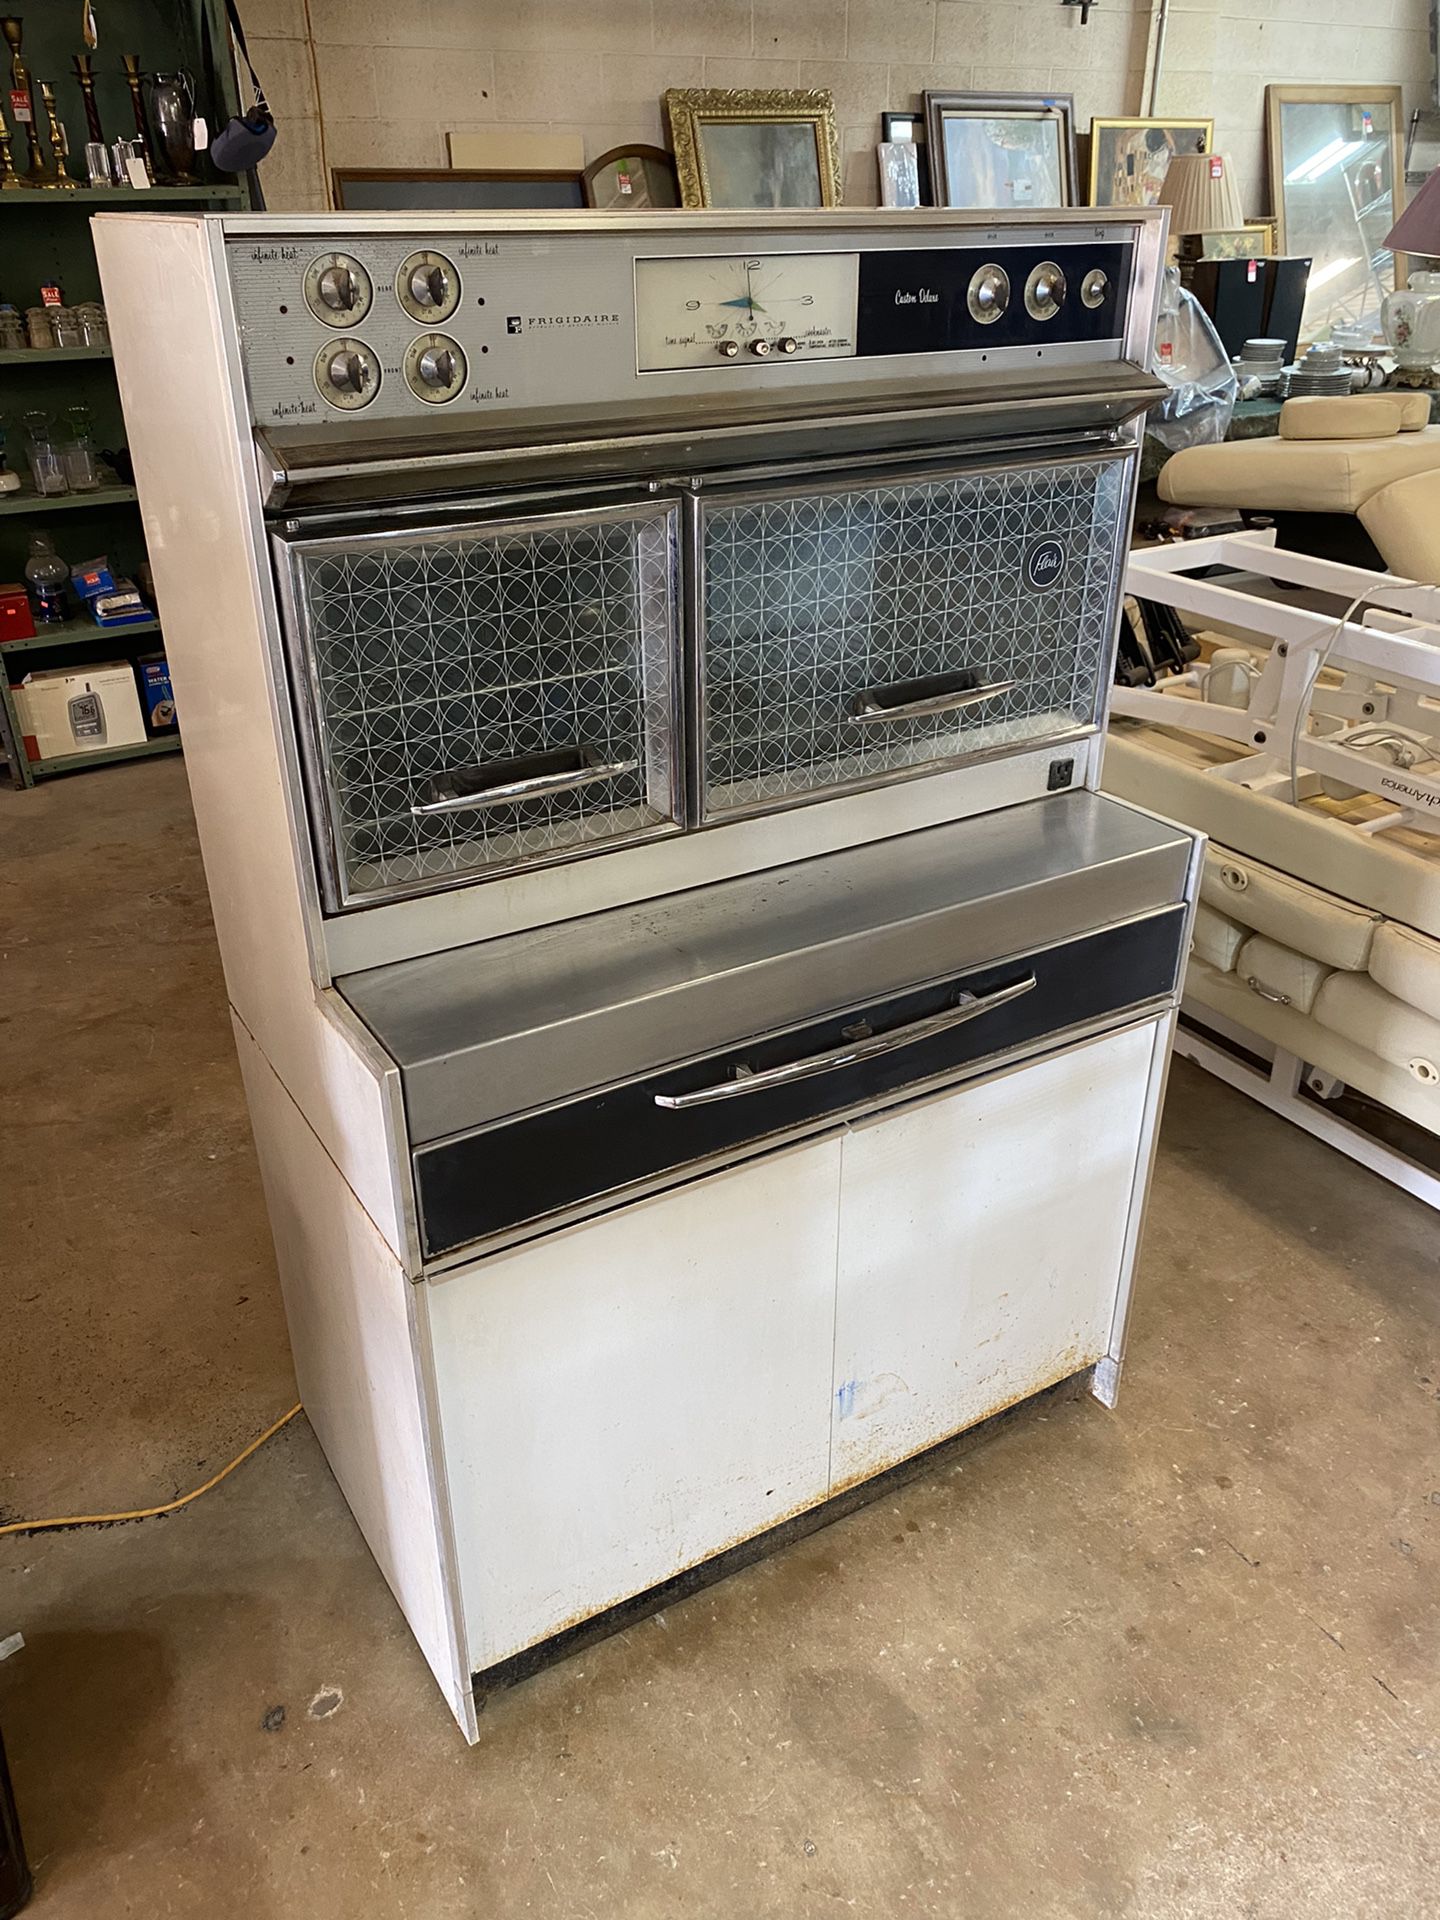 Working Frigidaire Flair Vintage Oven Stove 